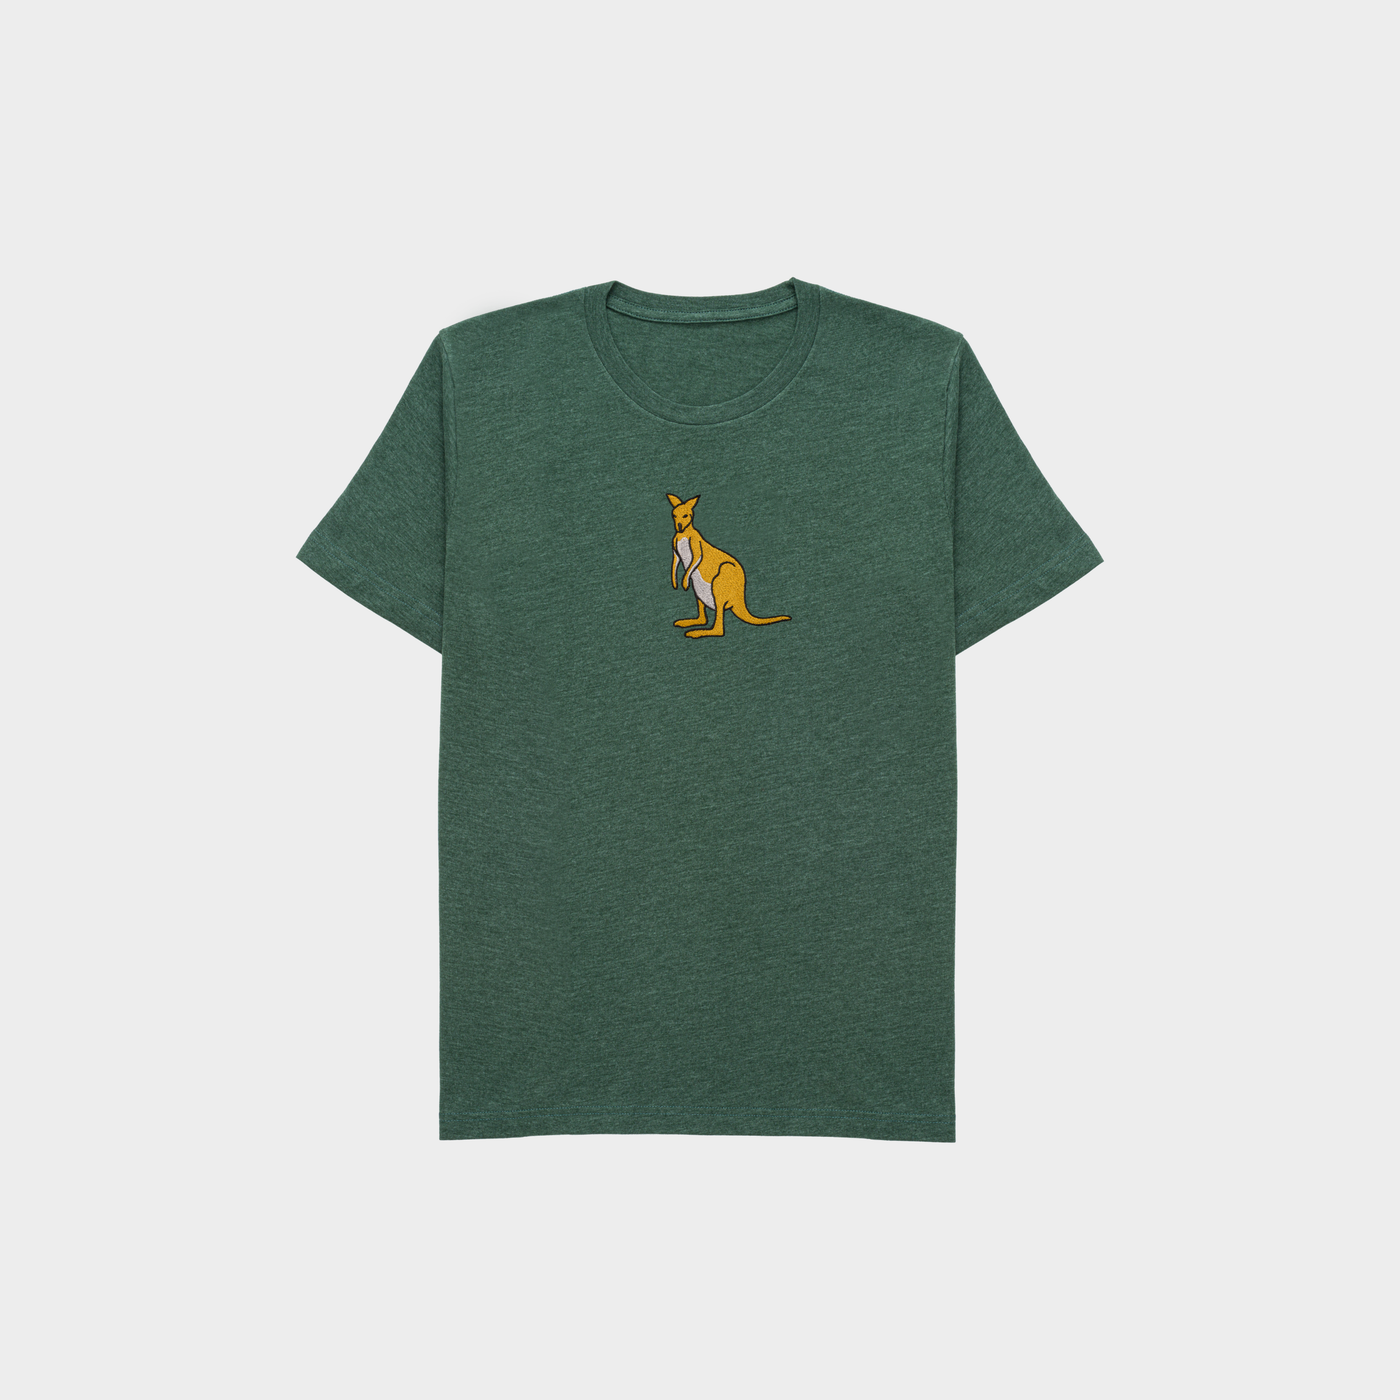 Bobby's Planet Kids Embroidered Kangaroo T-Shirt from Australia Down Under Animals Collection in Heather Forest Color#color_heather-forest